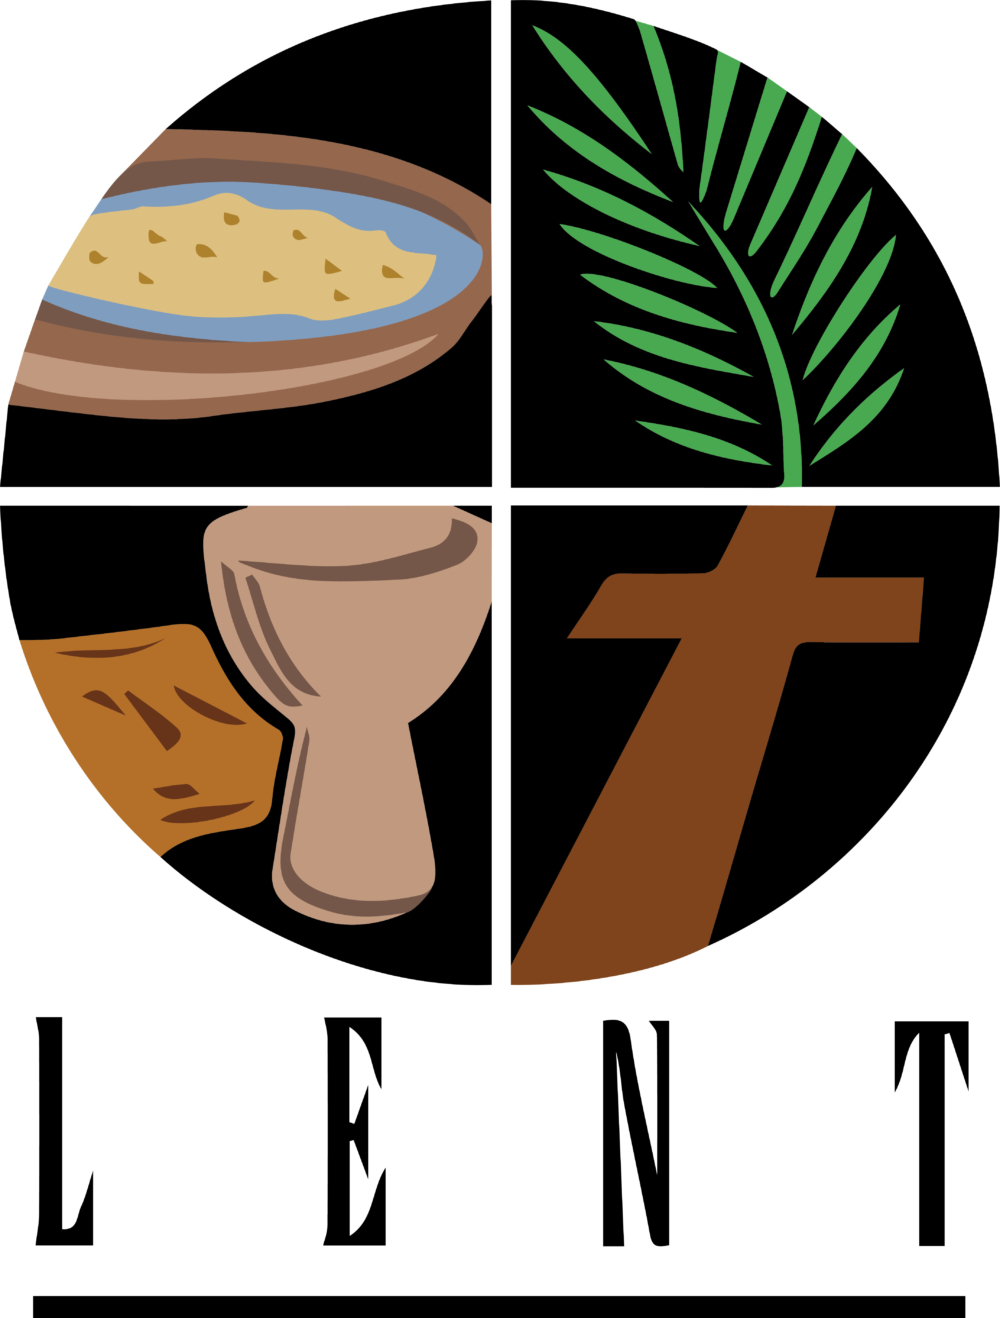 4th Sunday in Lent Image